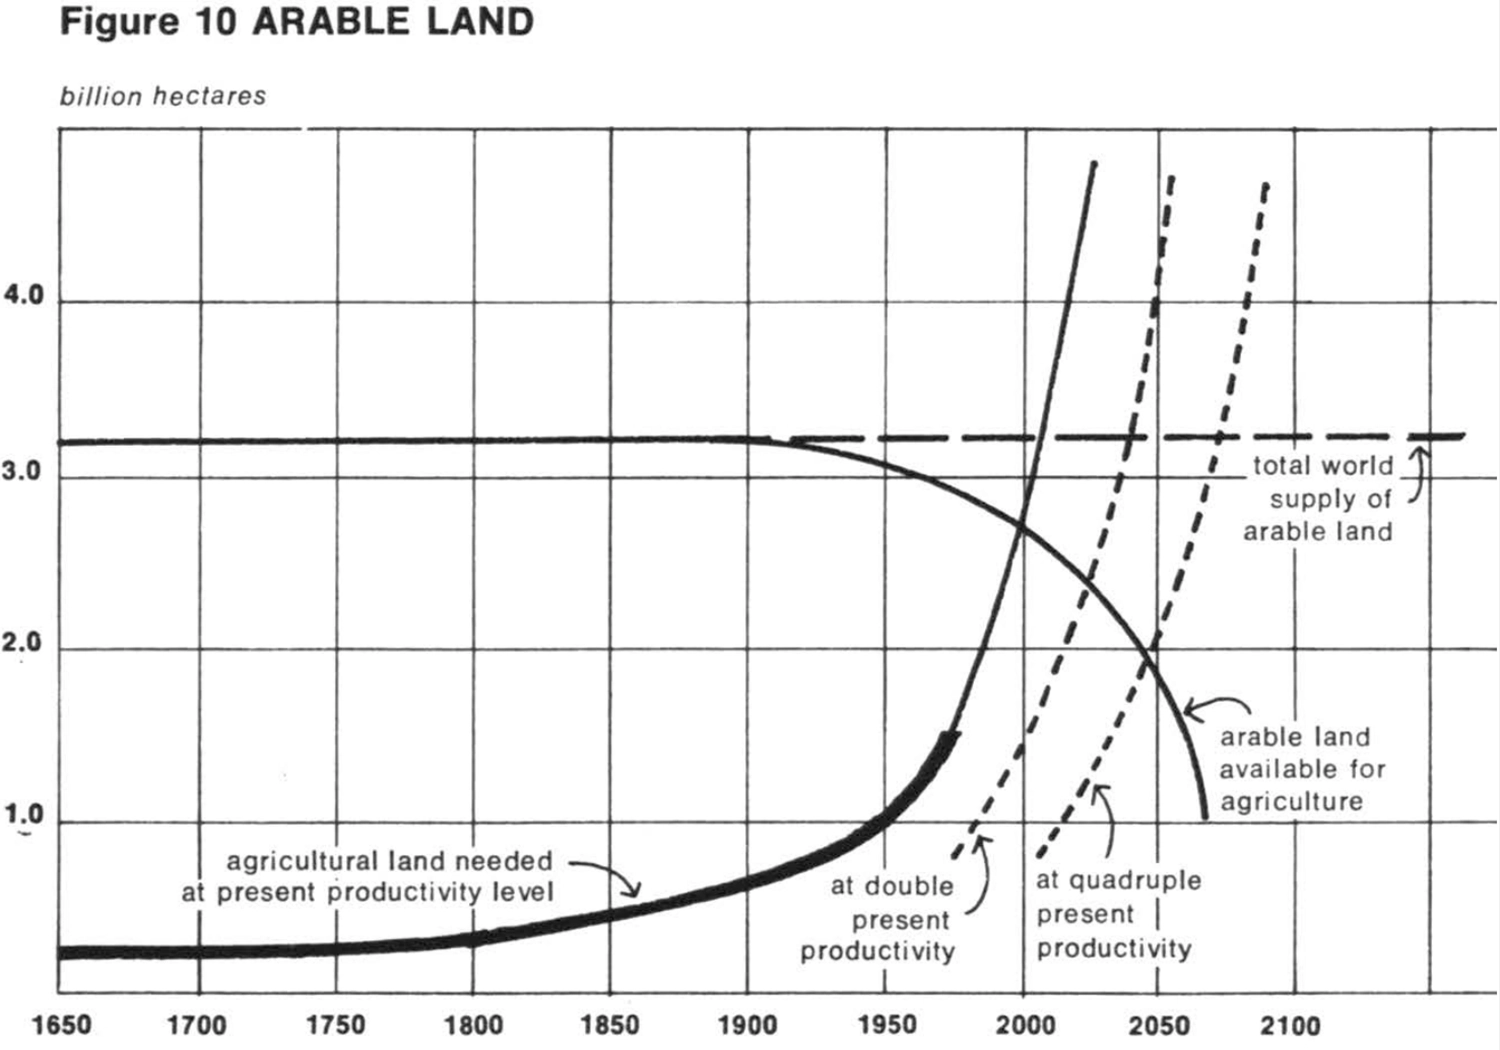 A plot showing the exponential growth of arable land. It then shows possible scenarios “agricultural land needed at present productivity level,” “at double present productivity,” “at quadruple present productivity,” all projected to eventually outpace the “total world supply of arable land.” 